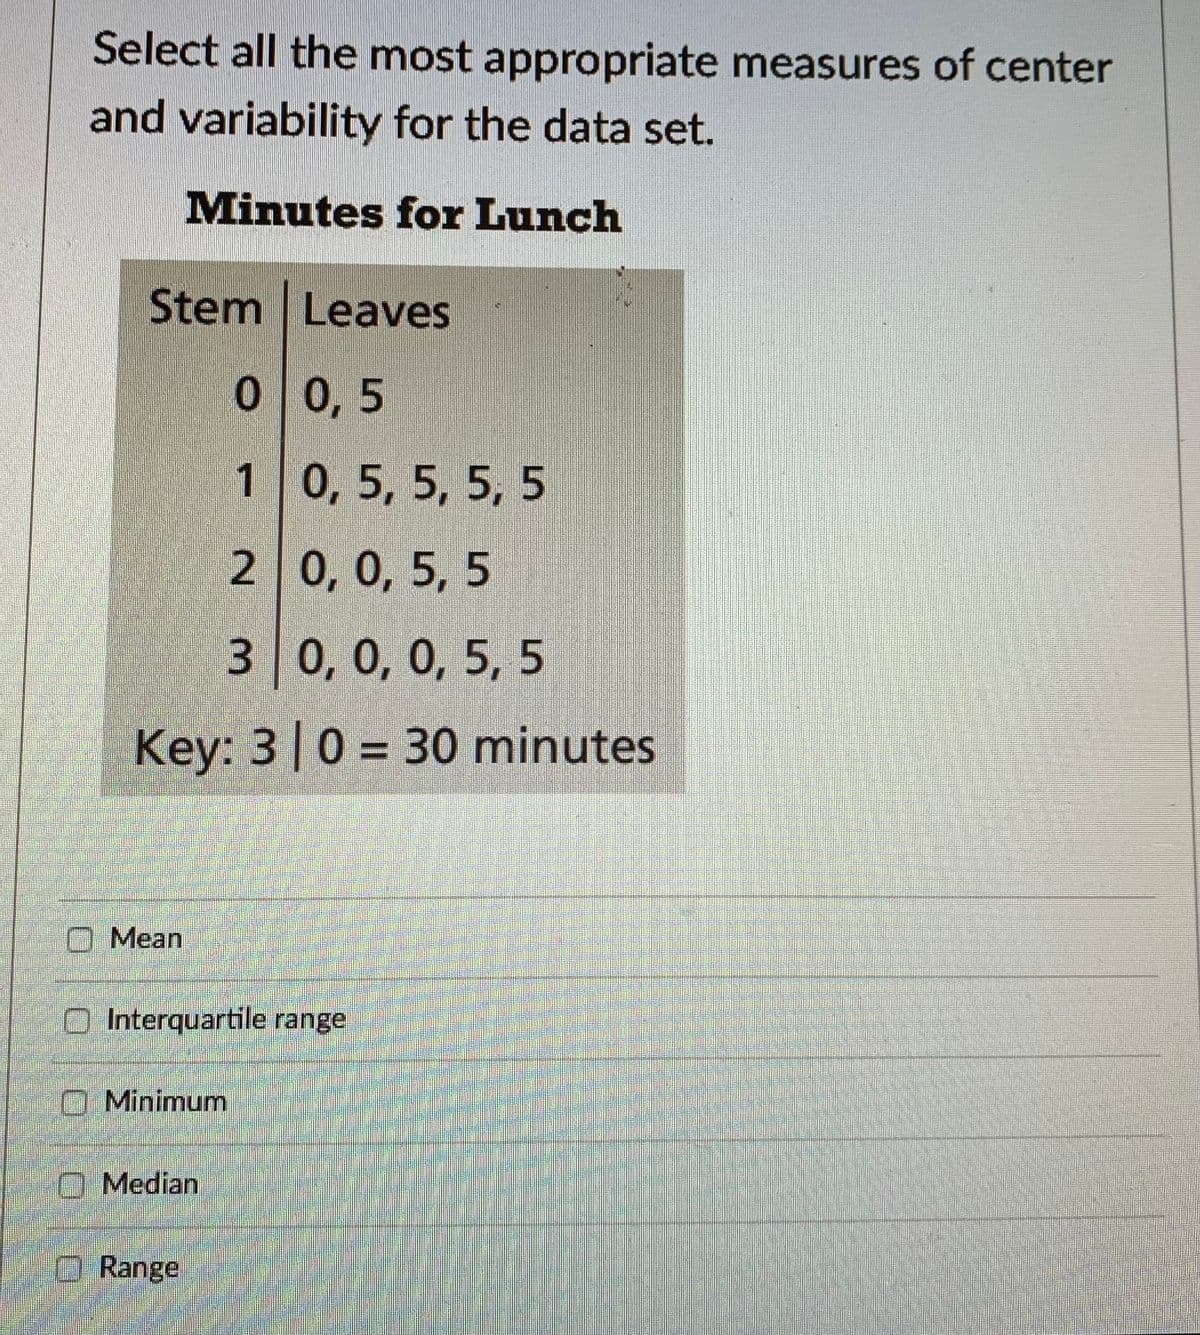 Select all the most appropriate measures of center
and variability for the data set.
Minutes for Lunch
Stem Leaves
0 0,5
1
Mean
Minimum
2
0, 0, 0, 5, 5
Key: 310 = 30 minutes
Median
3
Range
0, 5, 5, 5, 5
Interquartile range
0, 0, 5, 5